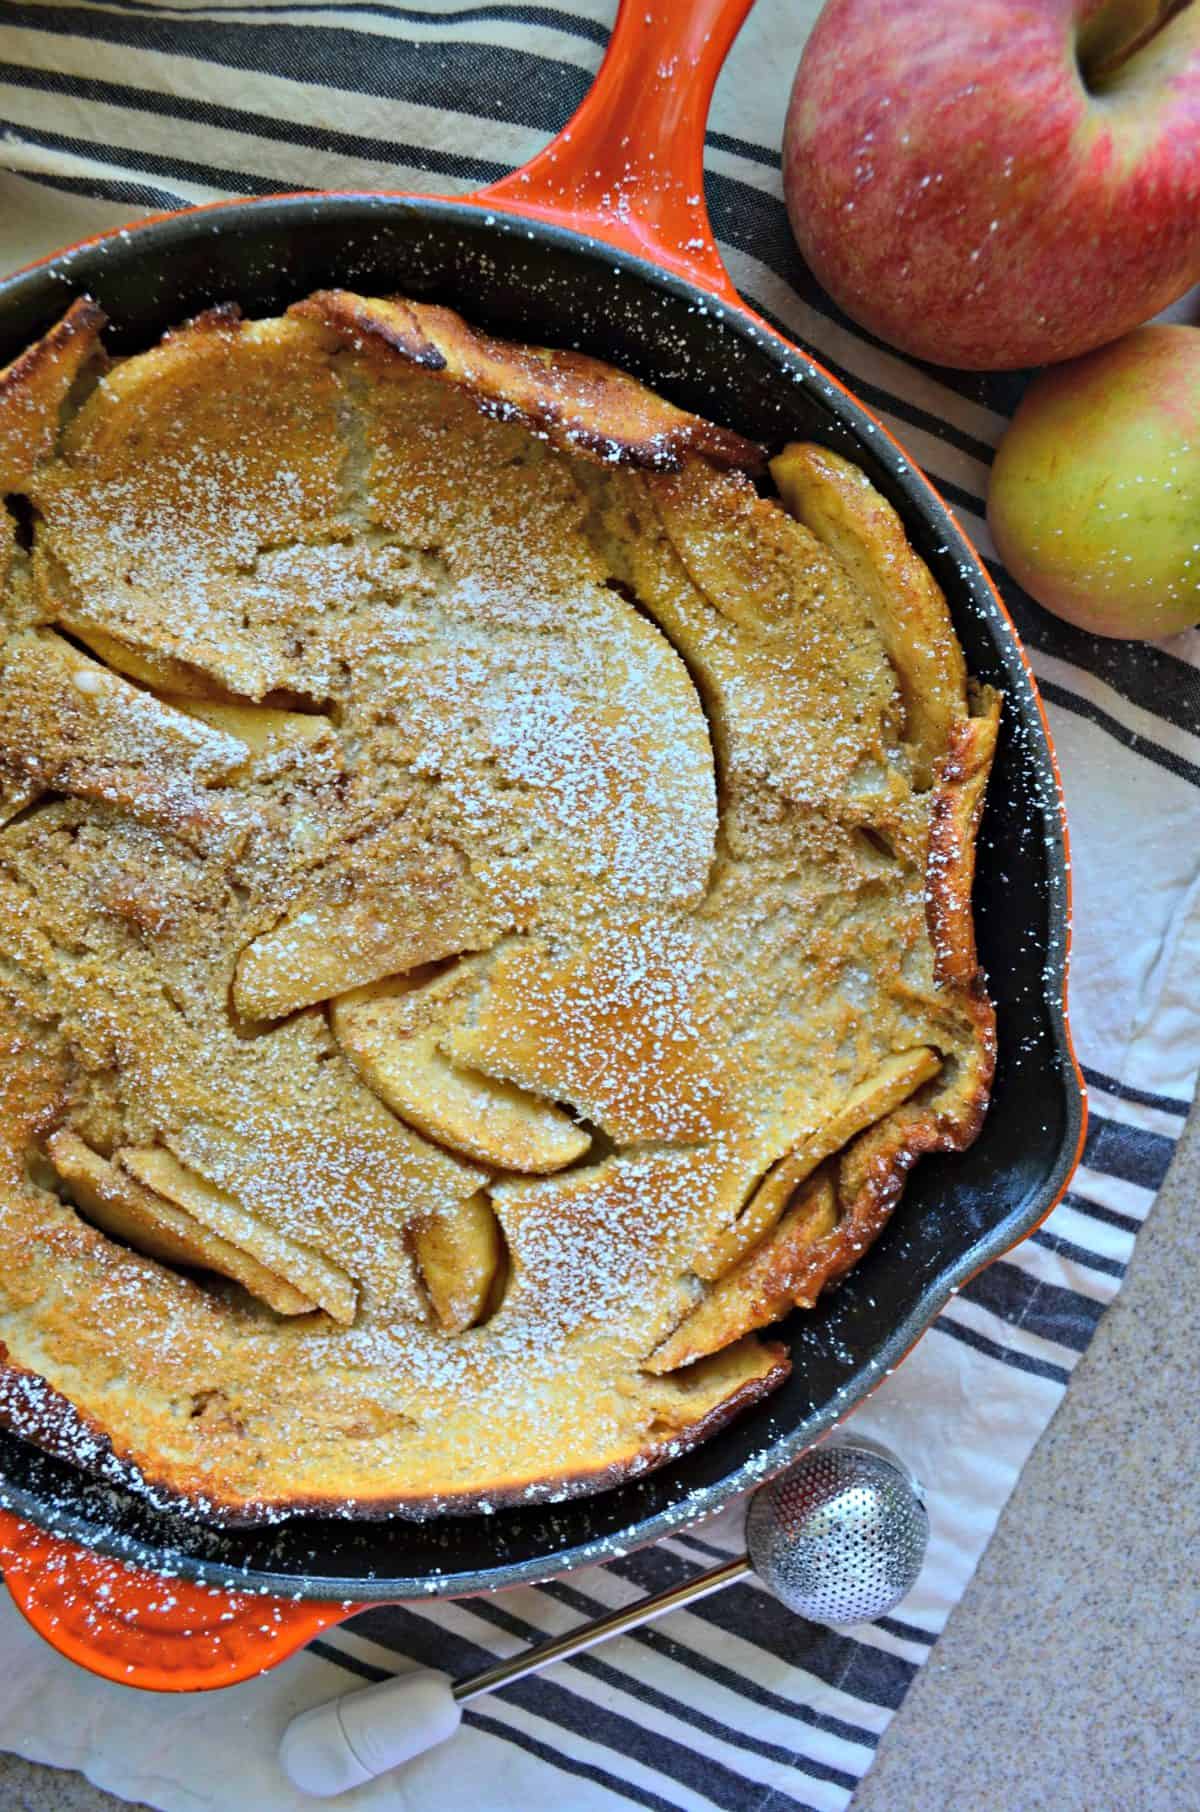 top view of pancake-like pastry with apple slices baked in skillet, topped with powdered sugar.